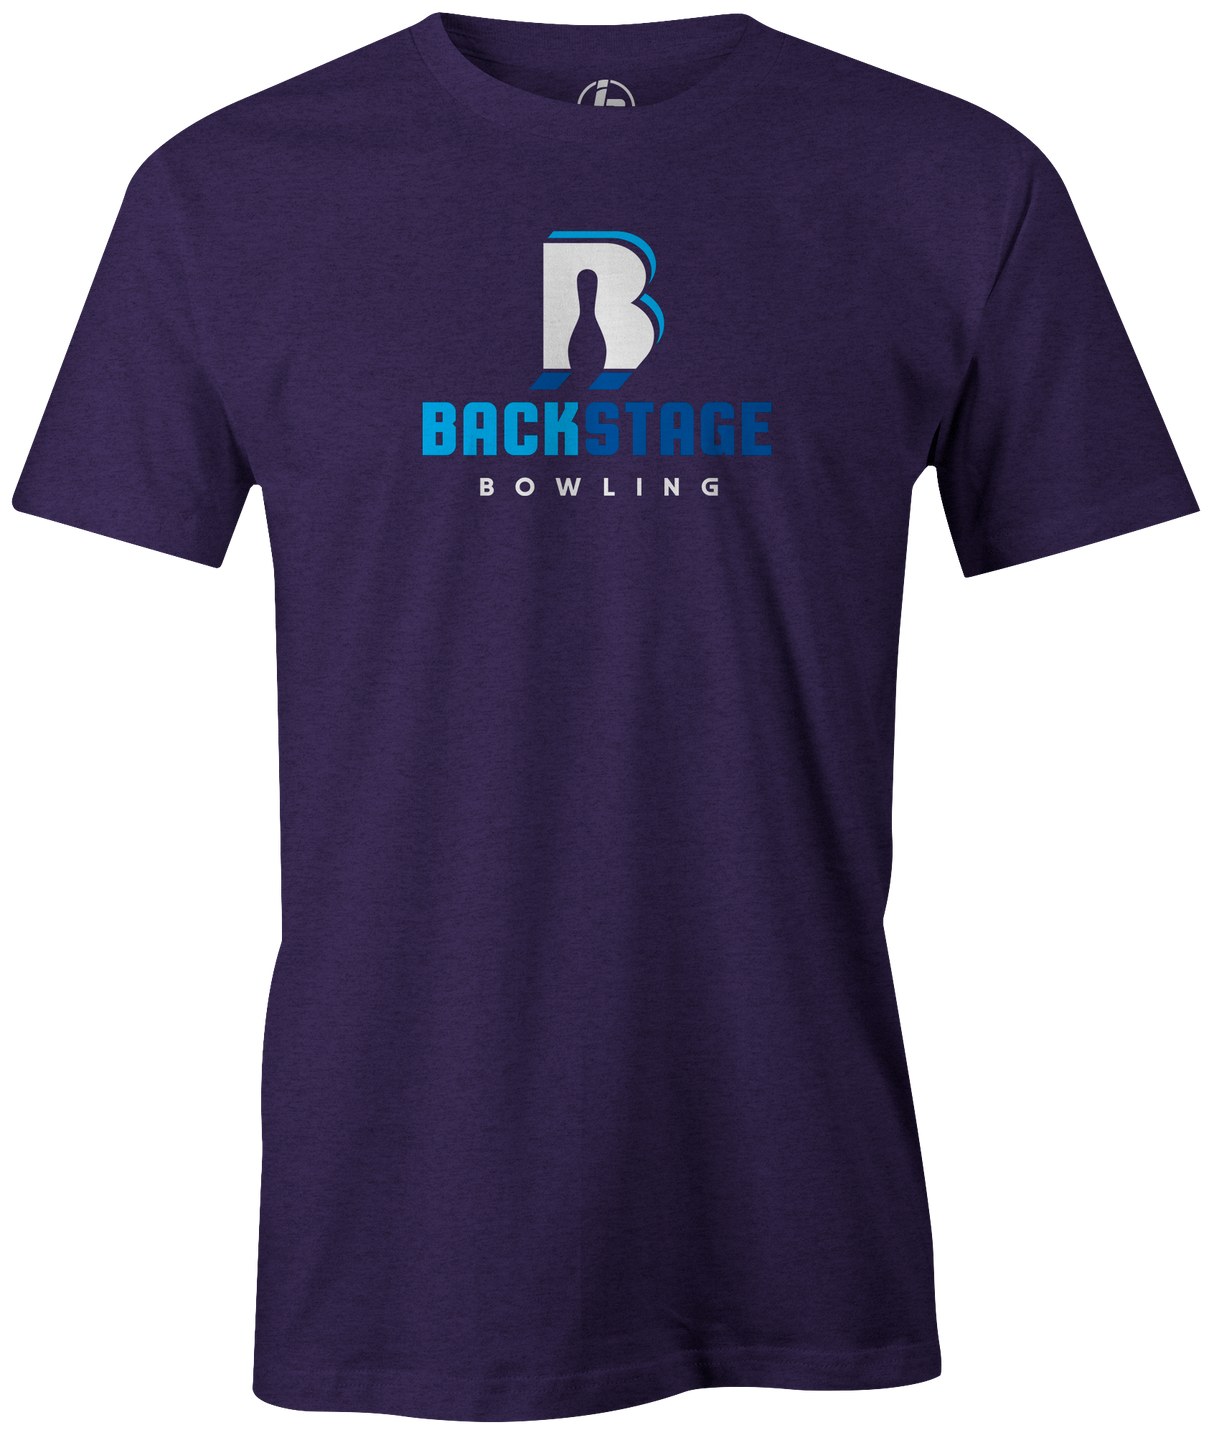 Backstage Bowling Classic T-shirt, men's, purple, tee, tee-shirt, t shirt, apparel, merch, practice, lanes, free shipping, discount, cheap, coupon, shannon o'keefe, bryan o'keefe, mike jasnau, mike shady, coaching, membership, cool, vintage, authentic, original